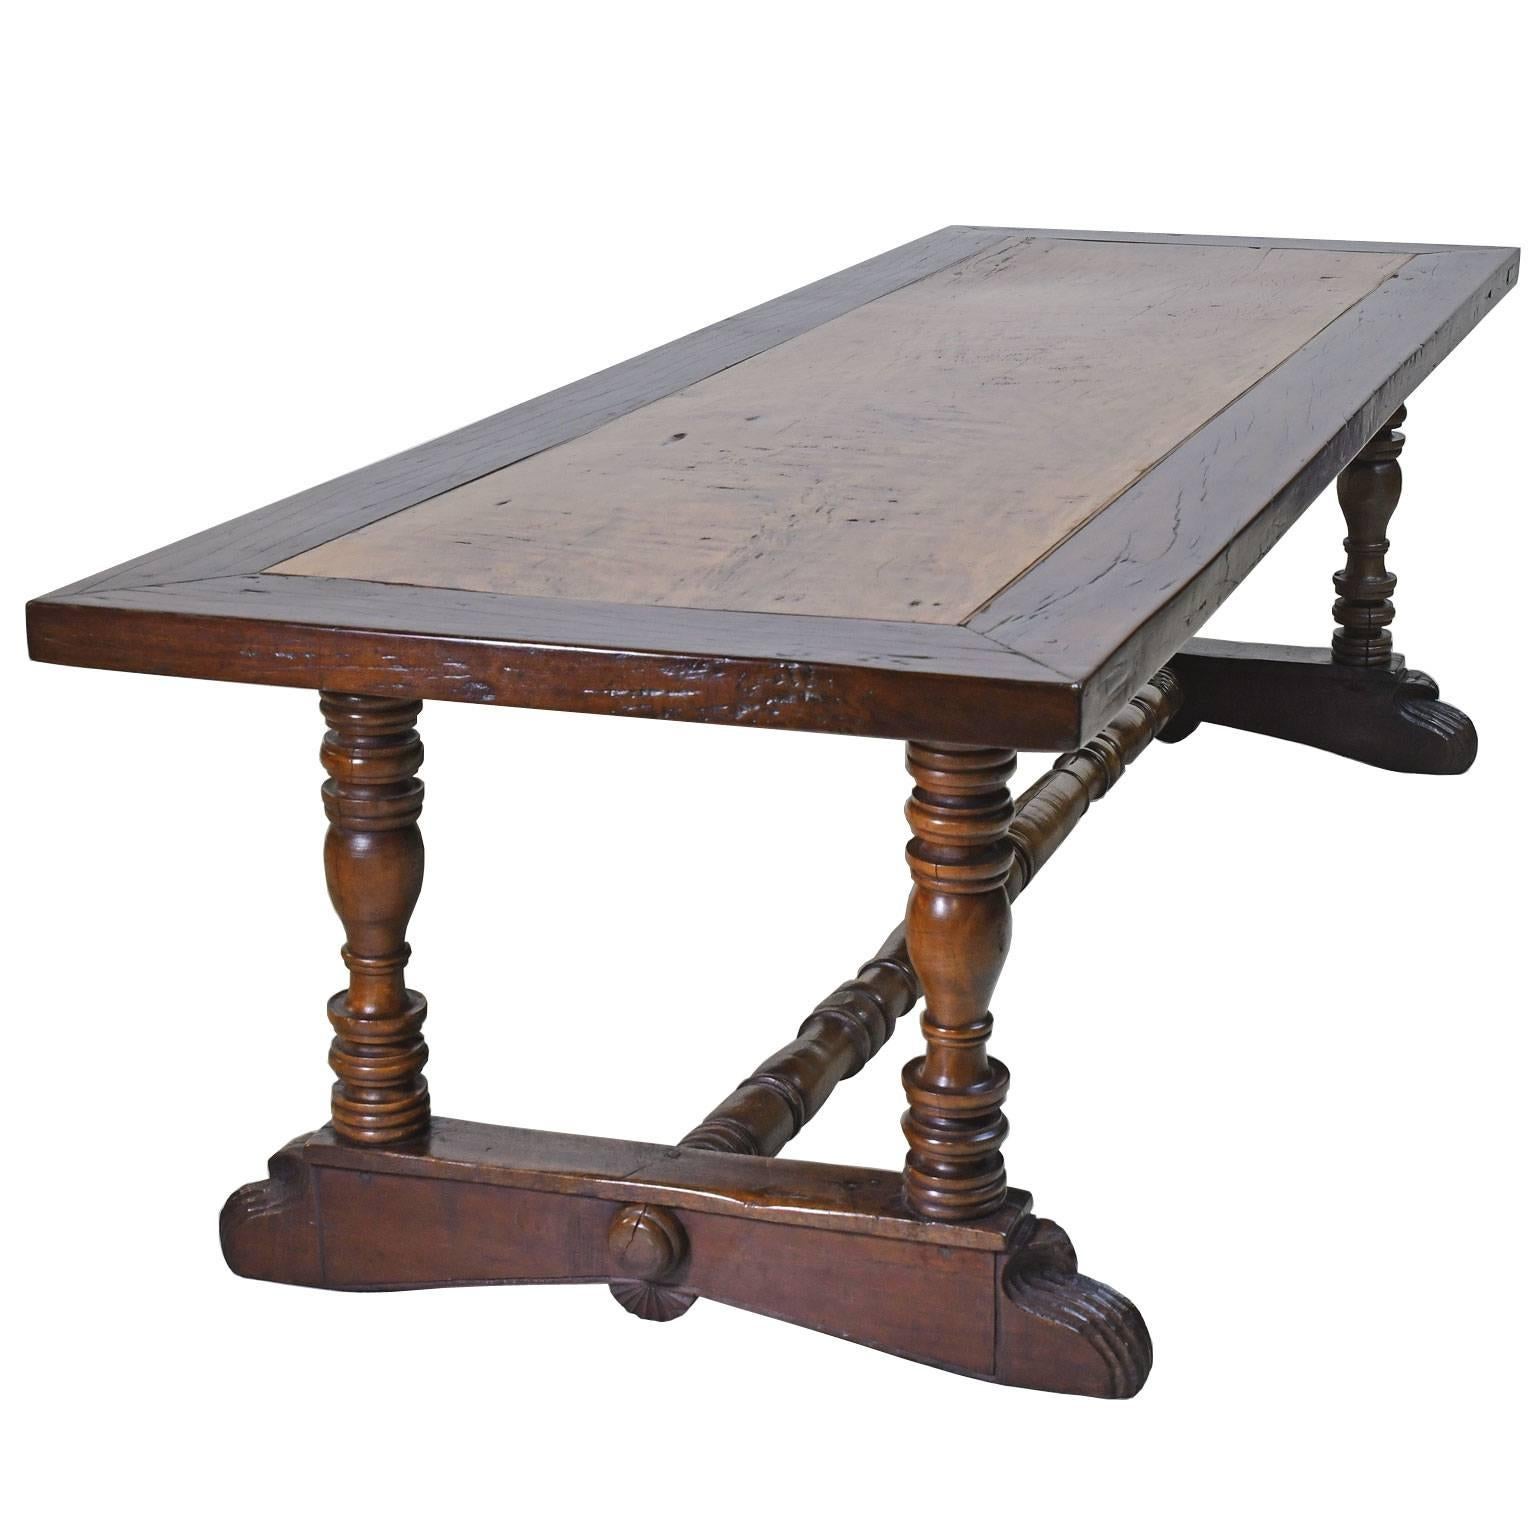 Turned Antique 18th Century Long Spanish-Colonial Dining Table with Trestle-Base